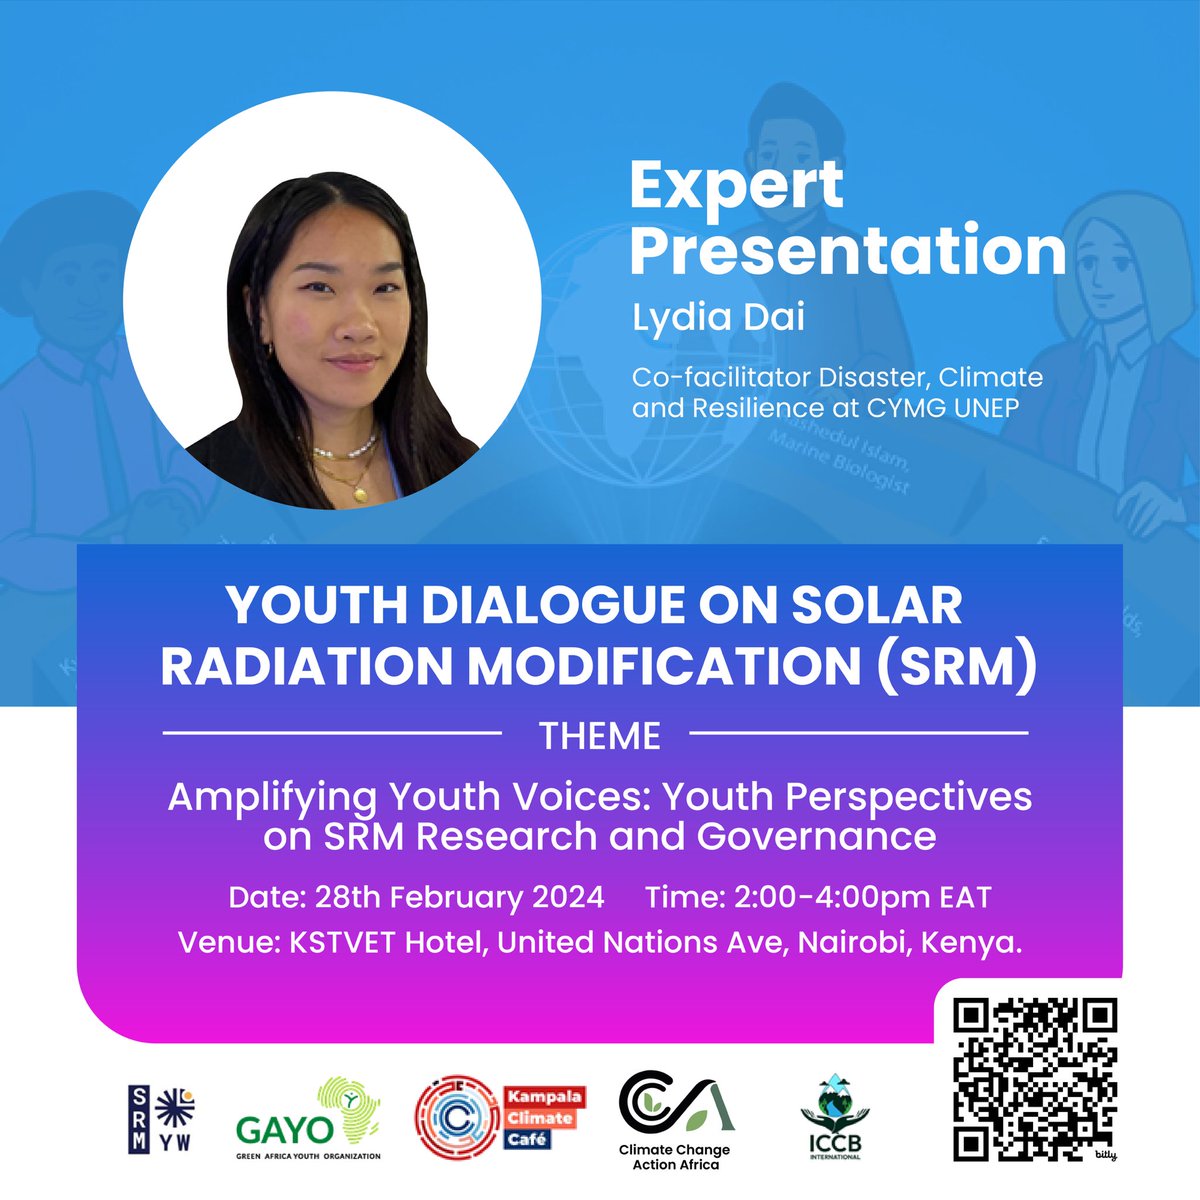 We are delighted to have Lydia Dai and Prof. Nana Ama Browne Klutse as our esteemed speakers at the upcoming side event, held on the sidelines of #UNEA6 later today. To register, please click on the following link: bit.ly/3UTcKvB